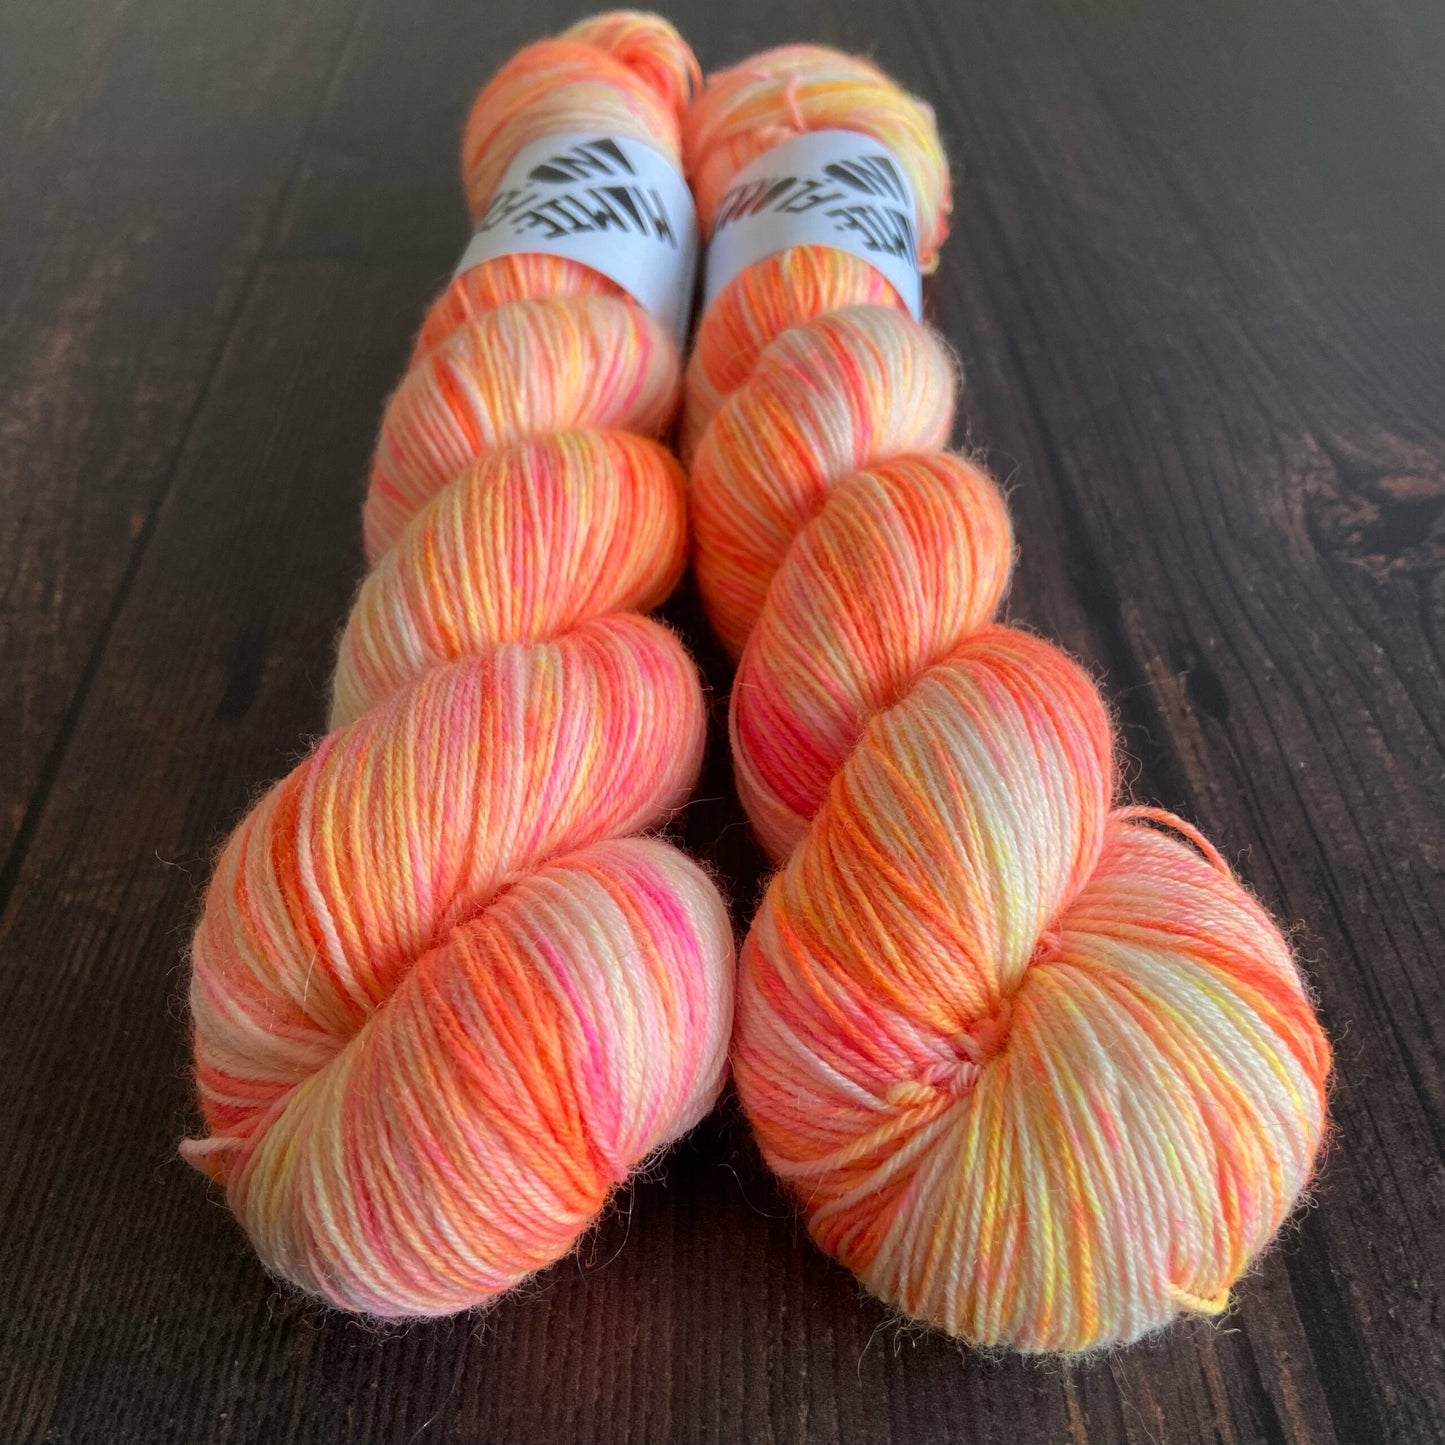 Schwimmparty in Combs – Blue Faced Leicester Sock